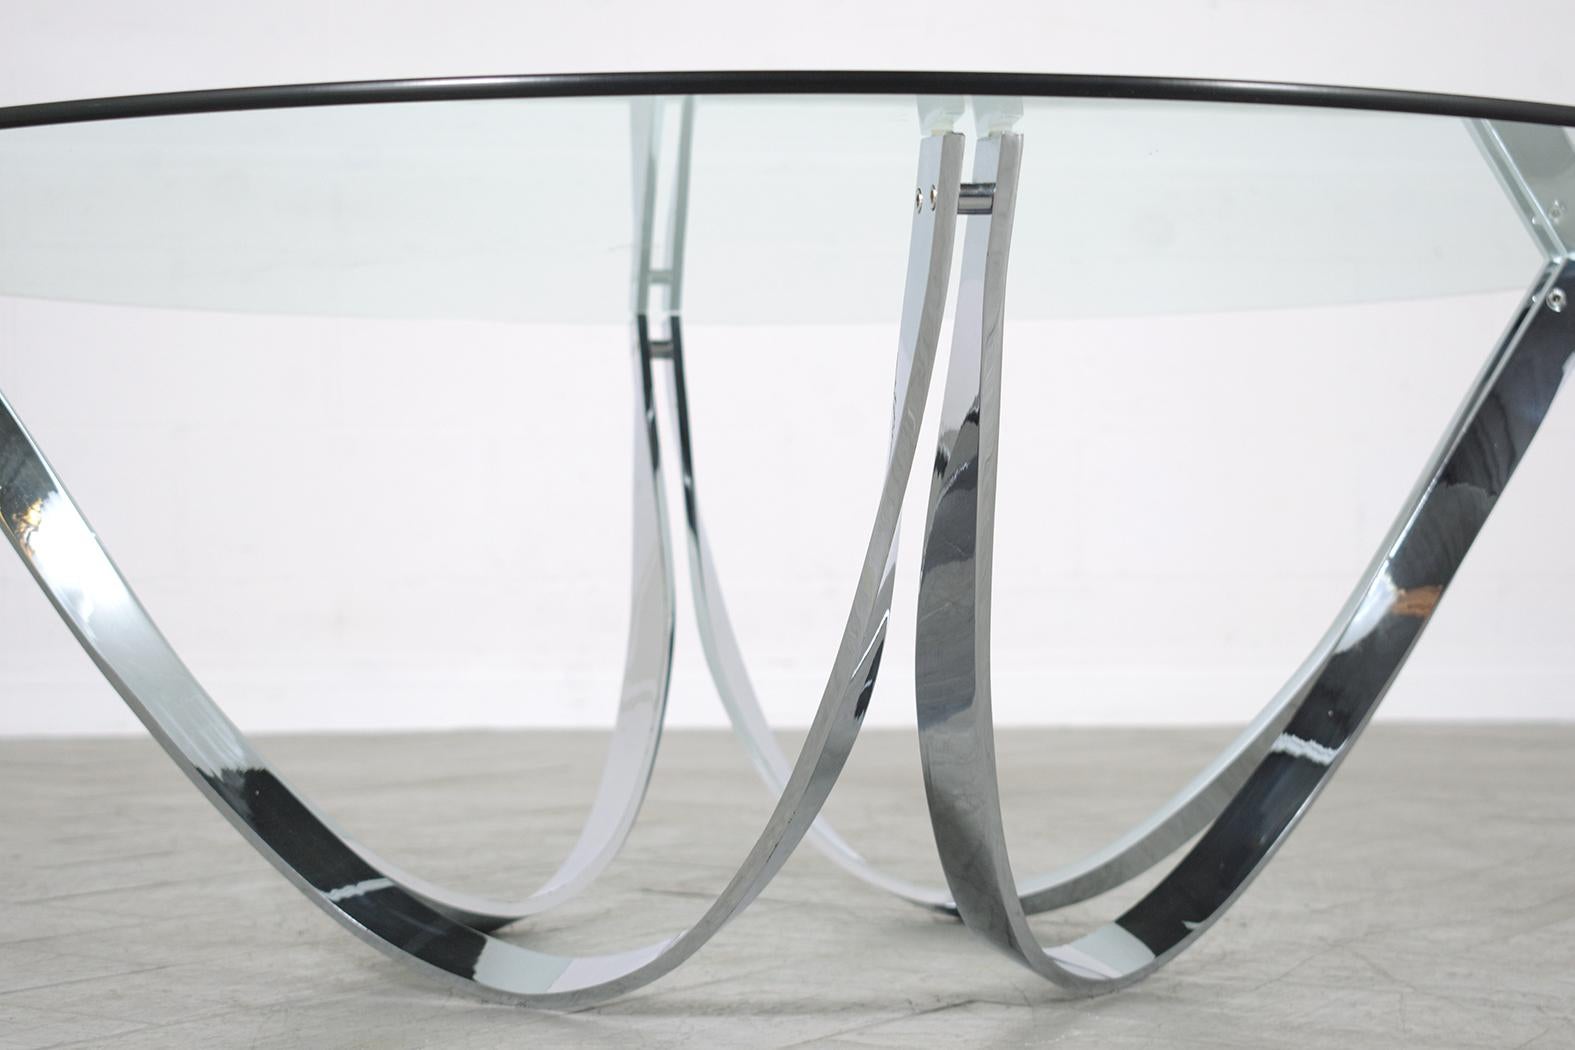 1960s Mid-Century Modern Coffee Table: A Fusion of Steel and Glass 2